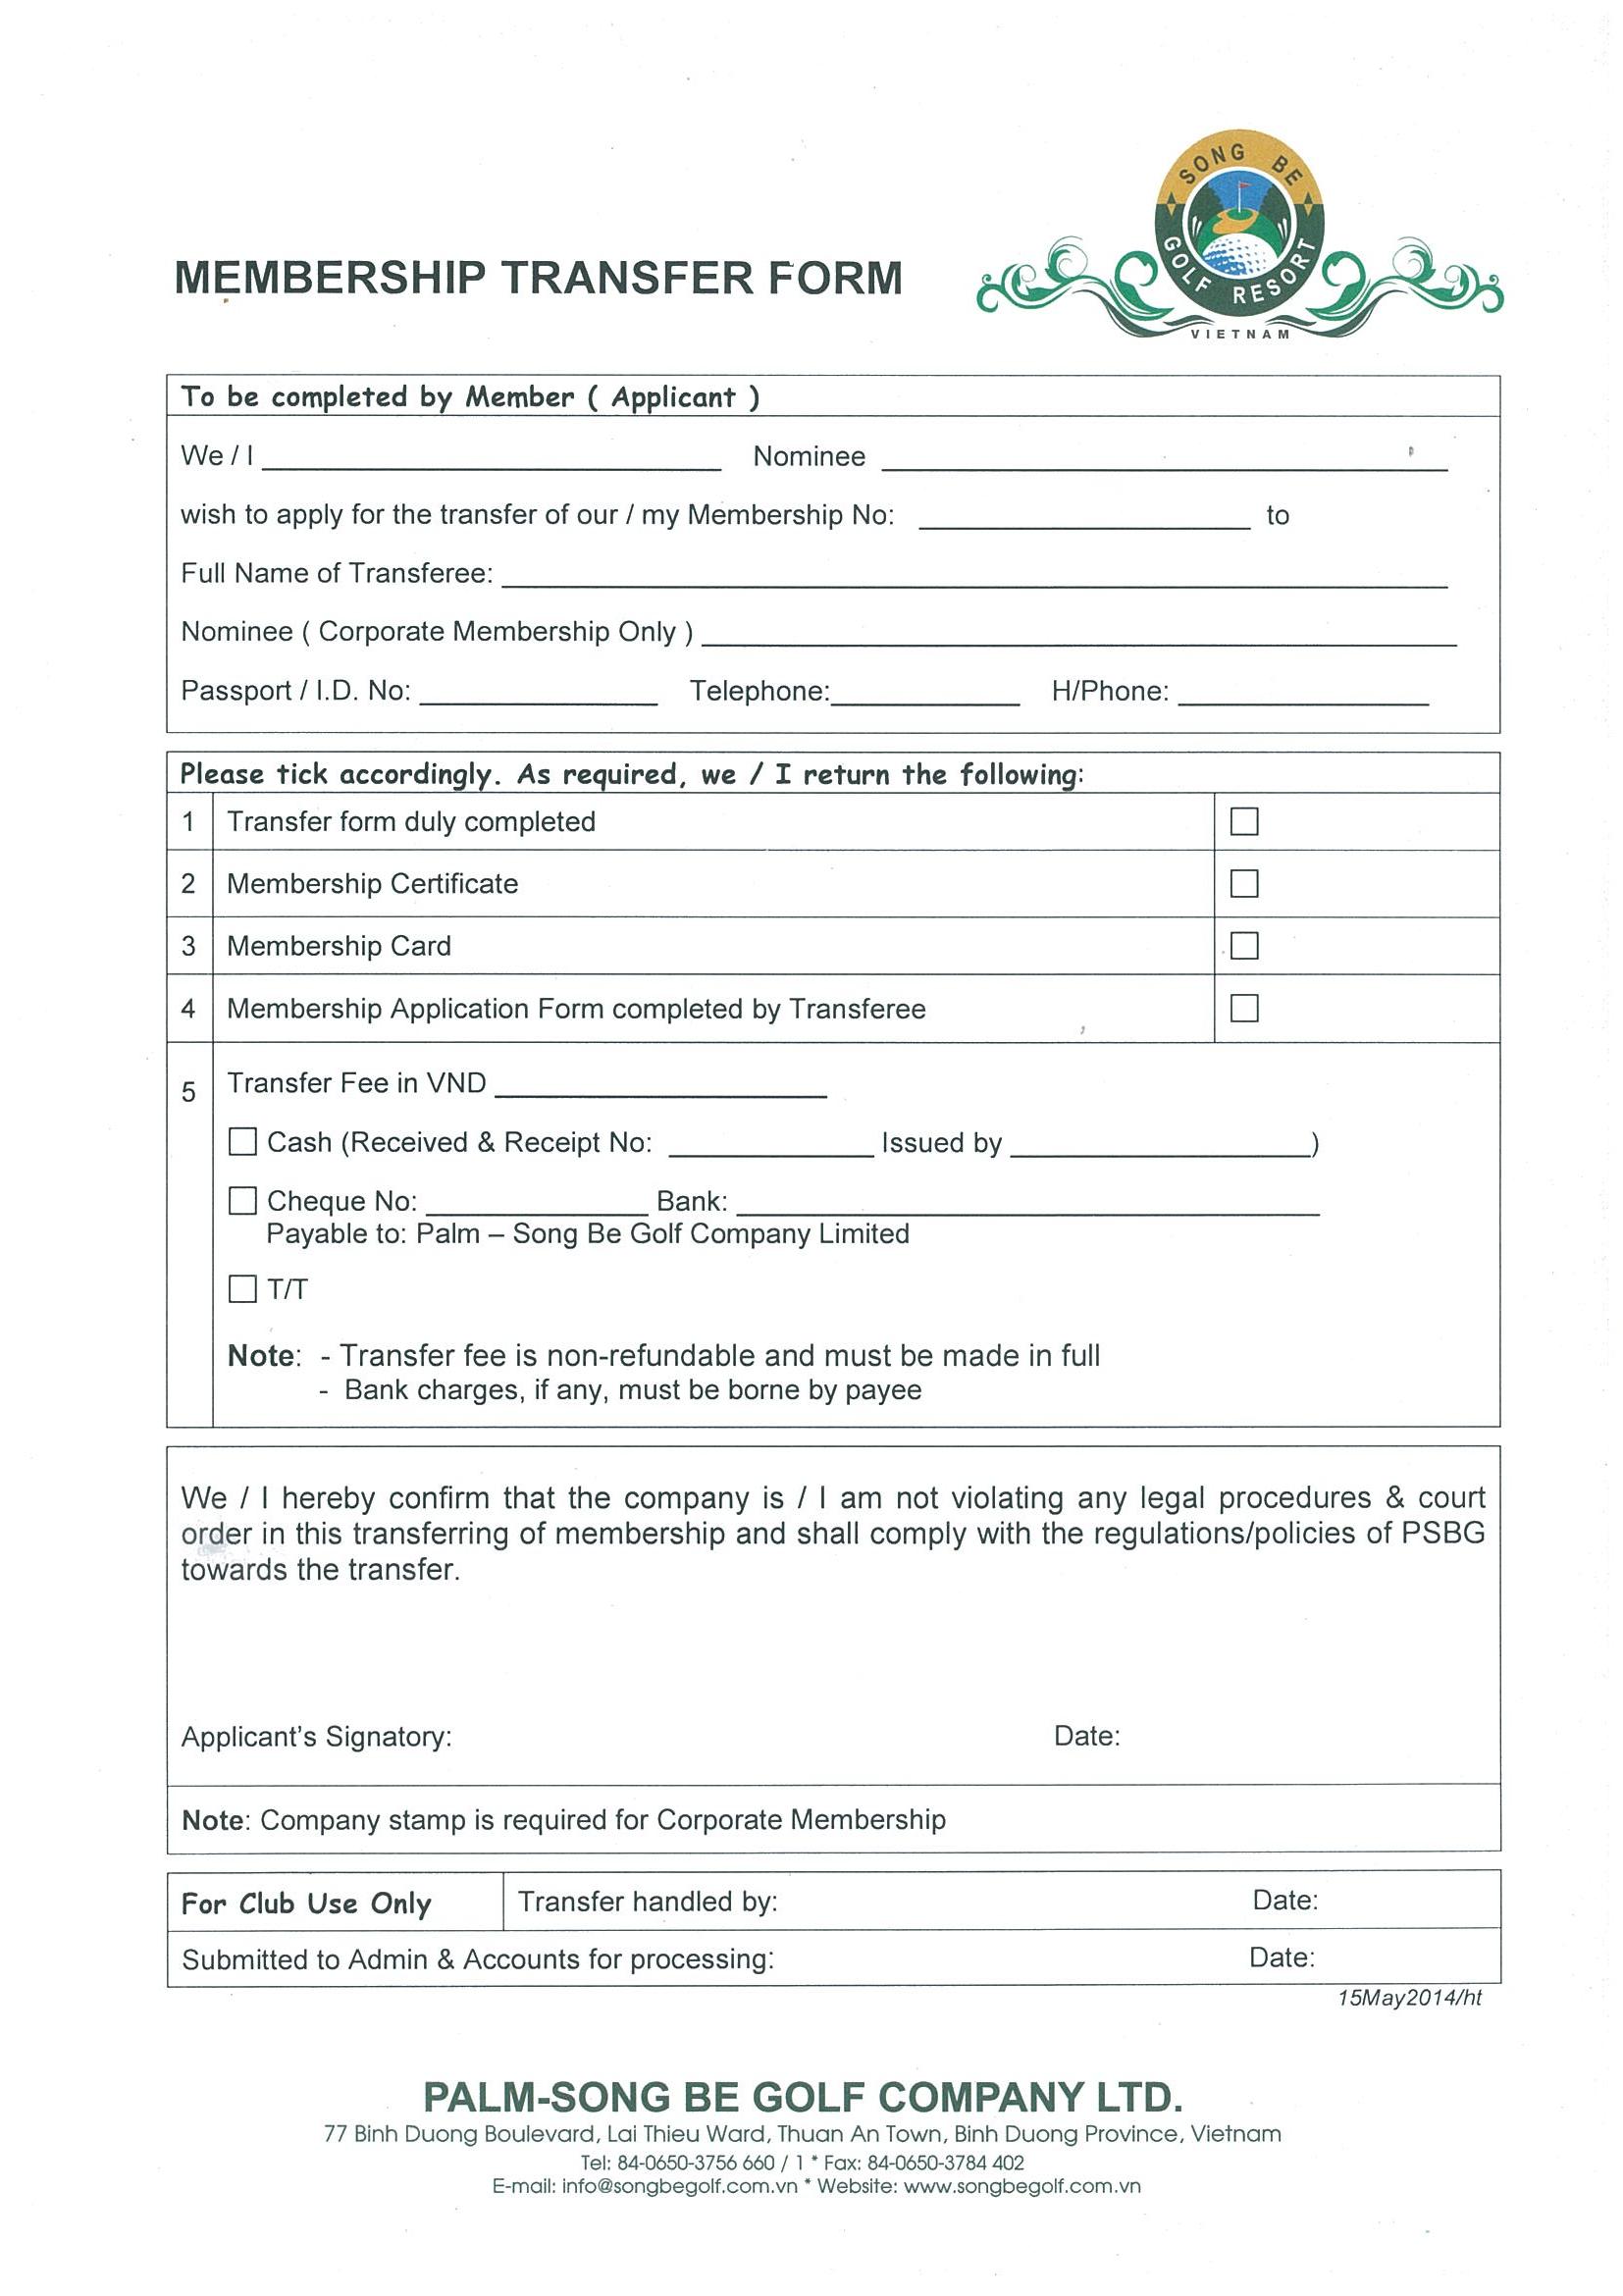 Membership Application Form Template Word from songbegolf.com